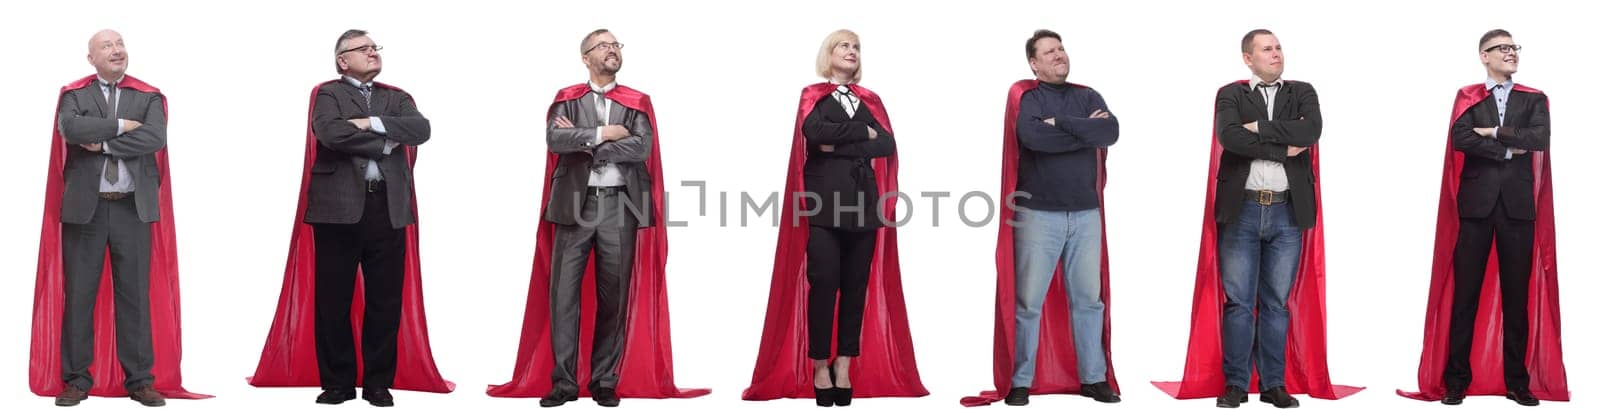 group of people in red raincoat isolated on white by asdf